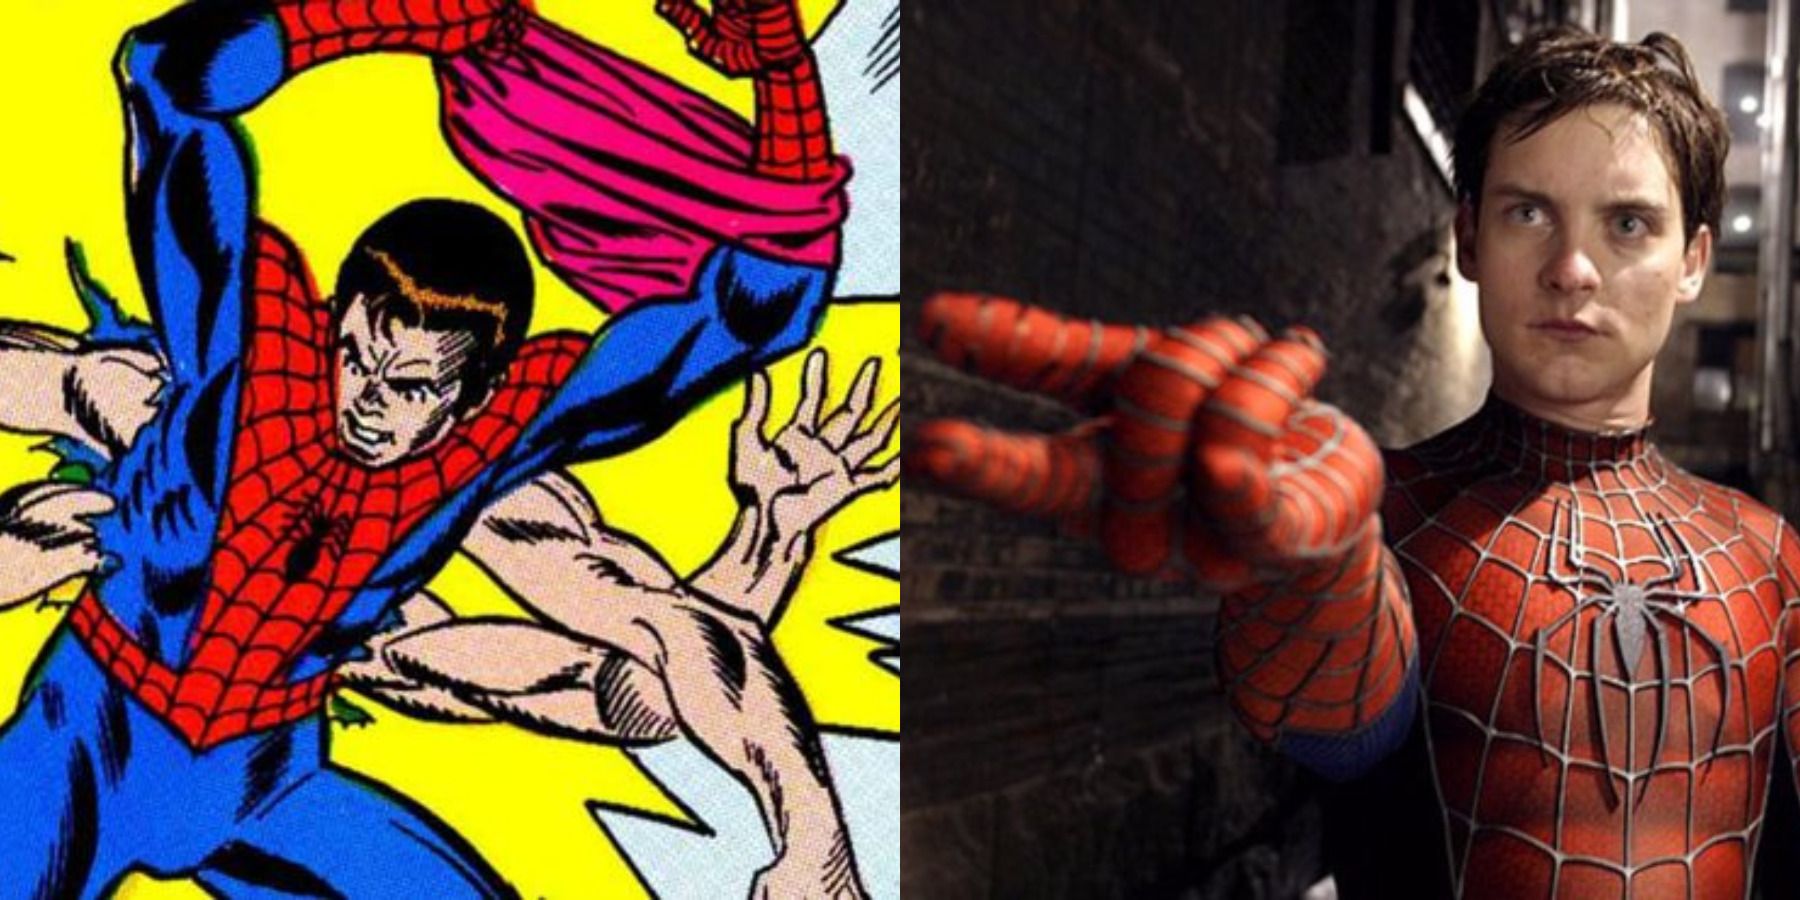 Spider-Man unused powers feature split image six arms and organic webbing